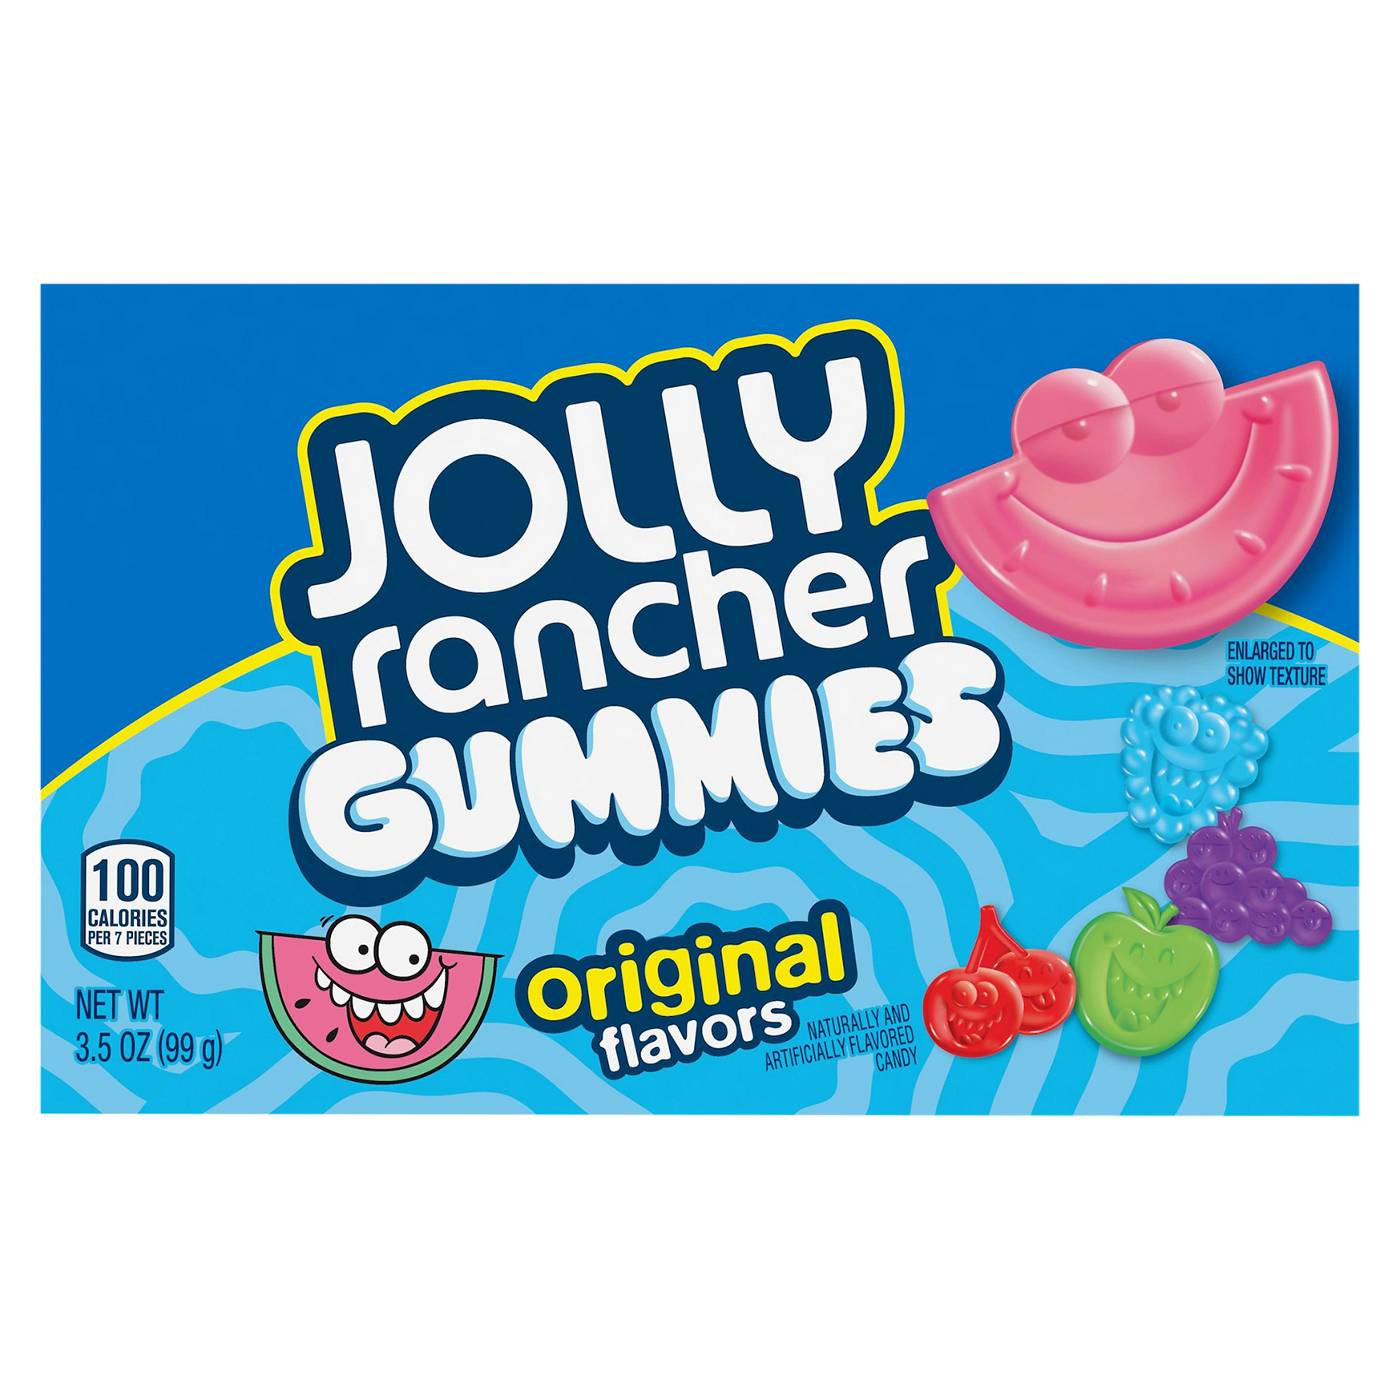 Jolly Rancher Gummies Original Flavors Candy; image 1 of 4